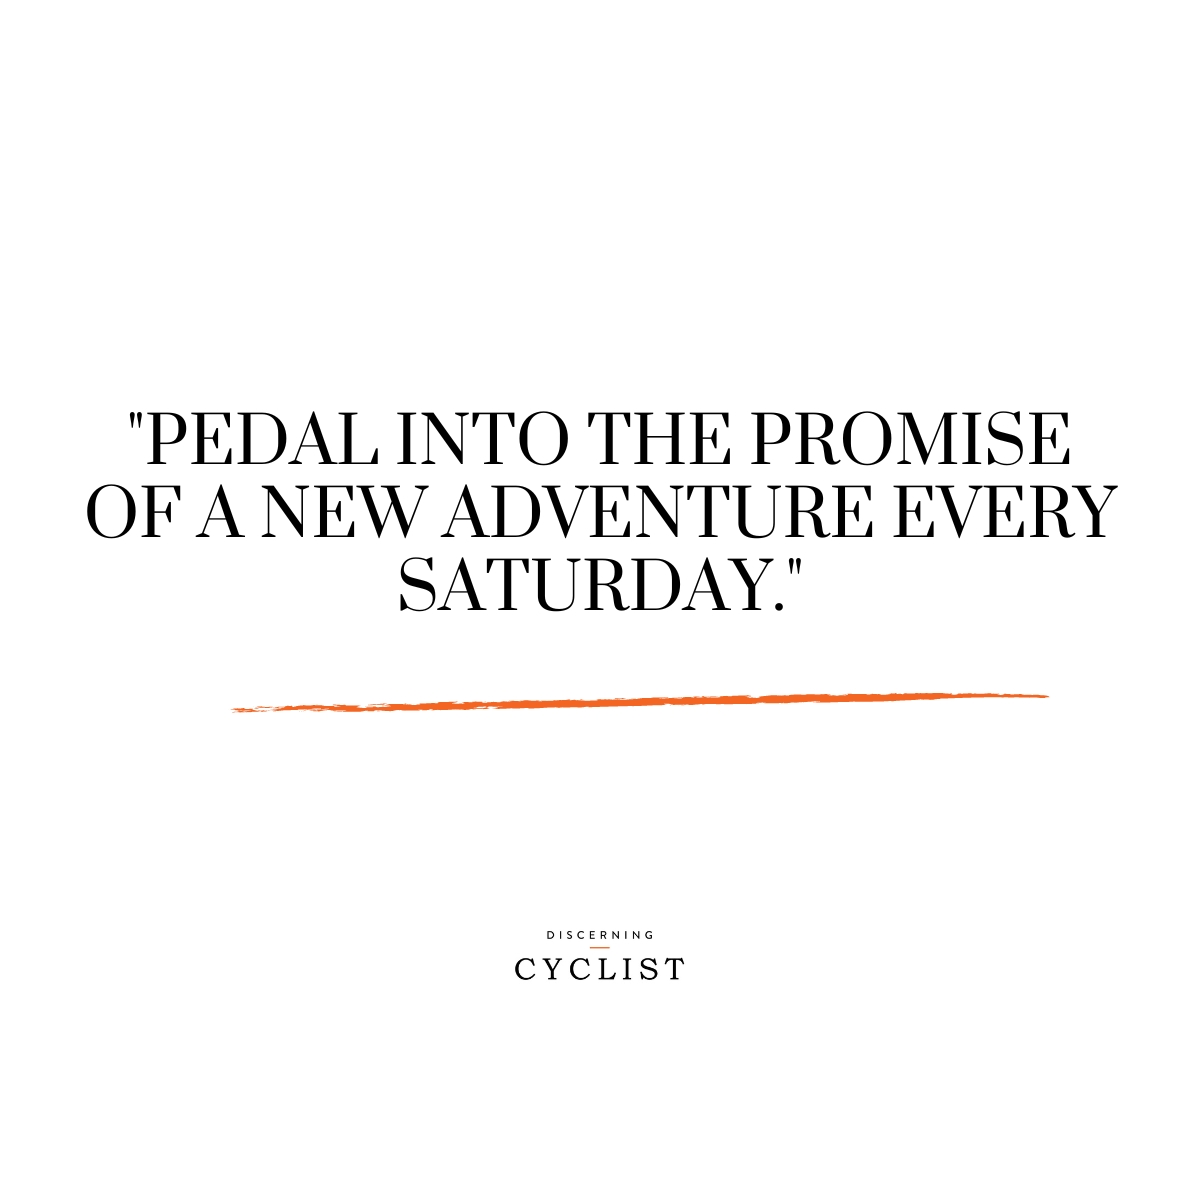 "Pedal into the promise of a new adventure every Saturday."